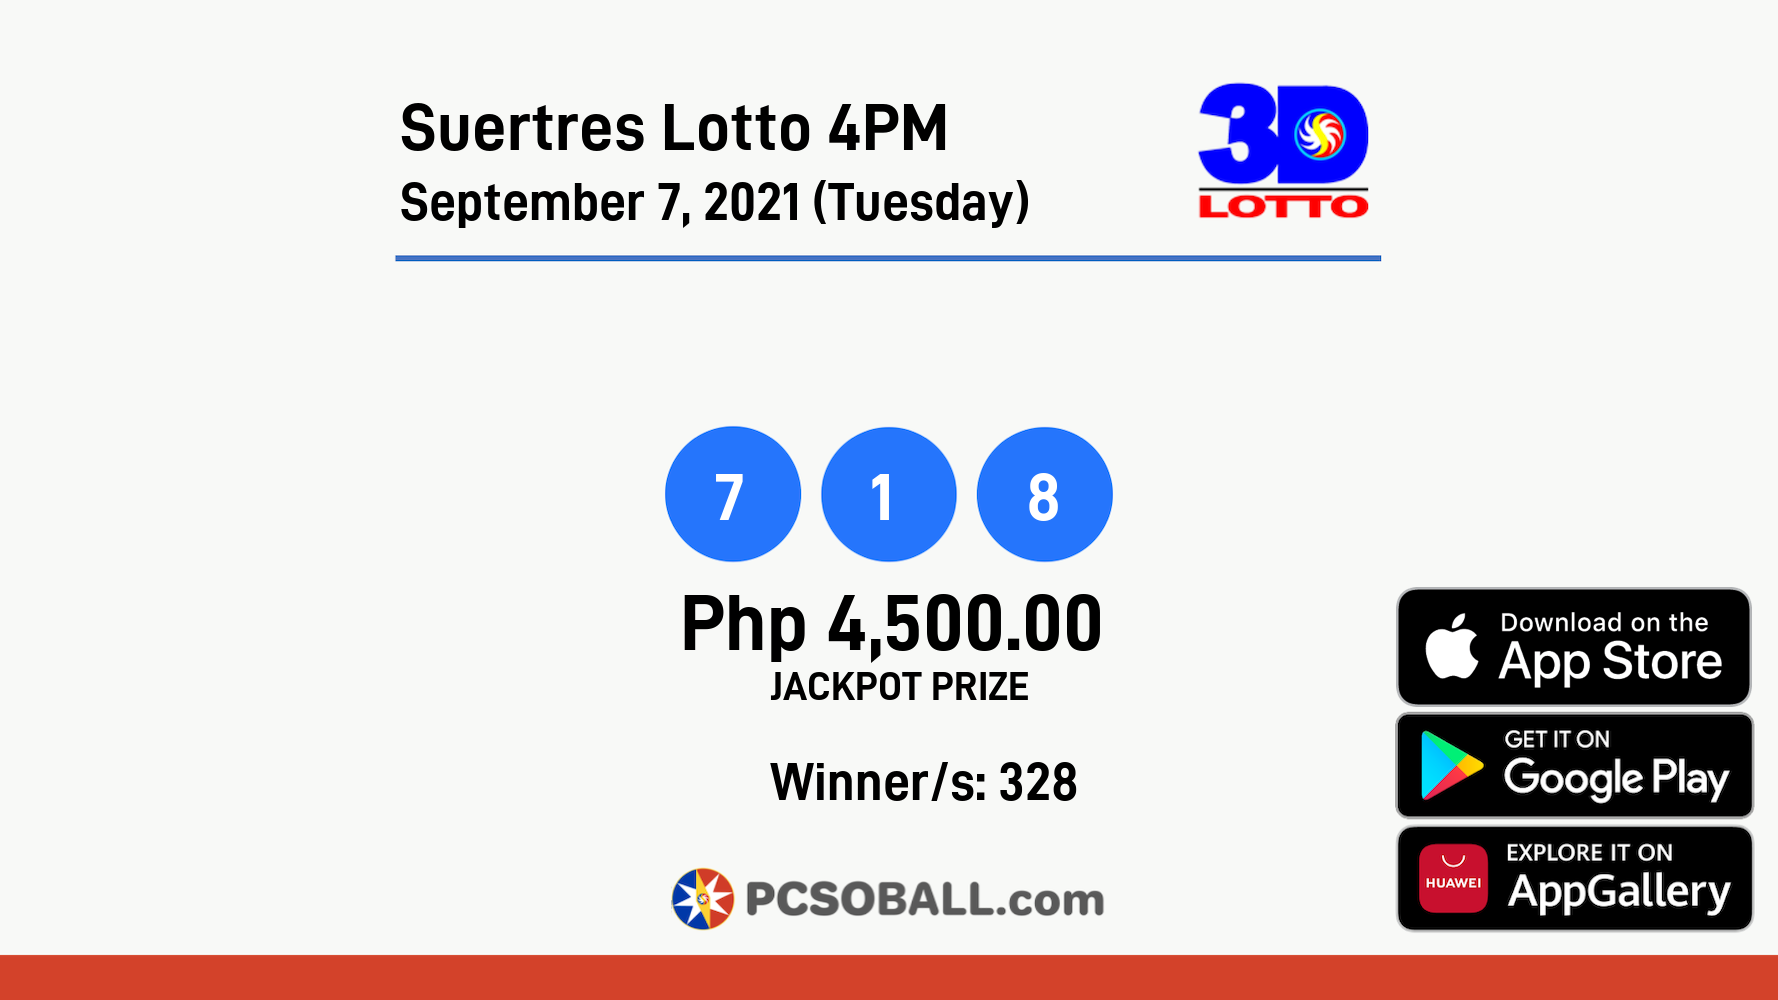 Suertres Lotto 4PM September 7, 2021 (Tuesday) Result